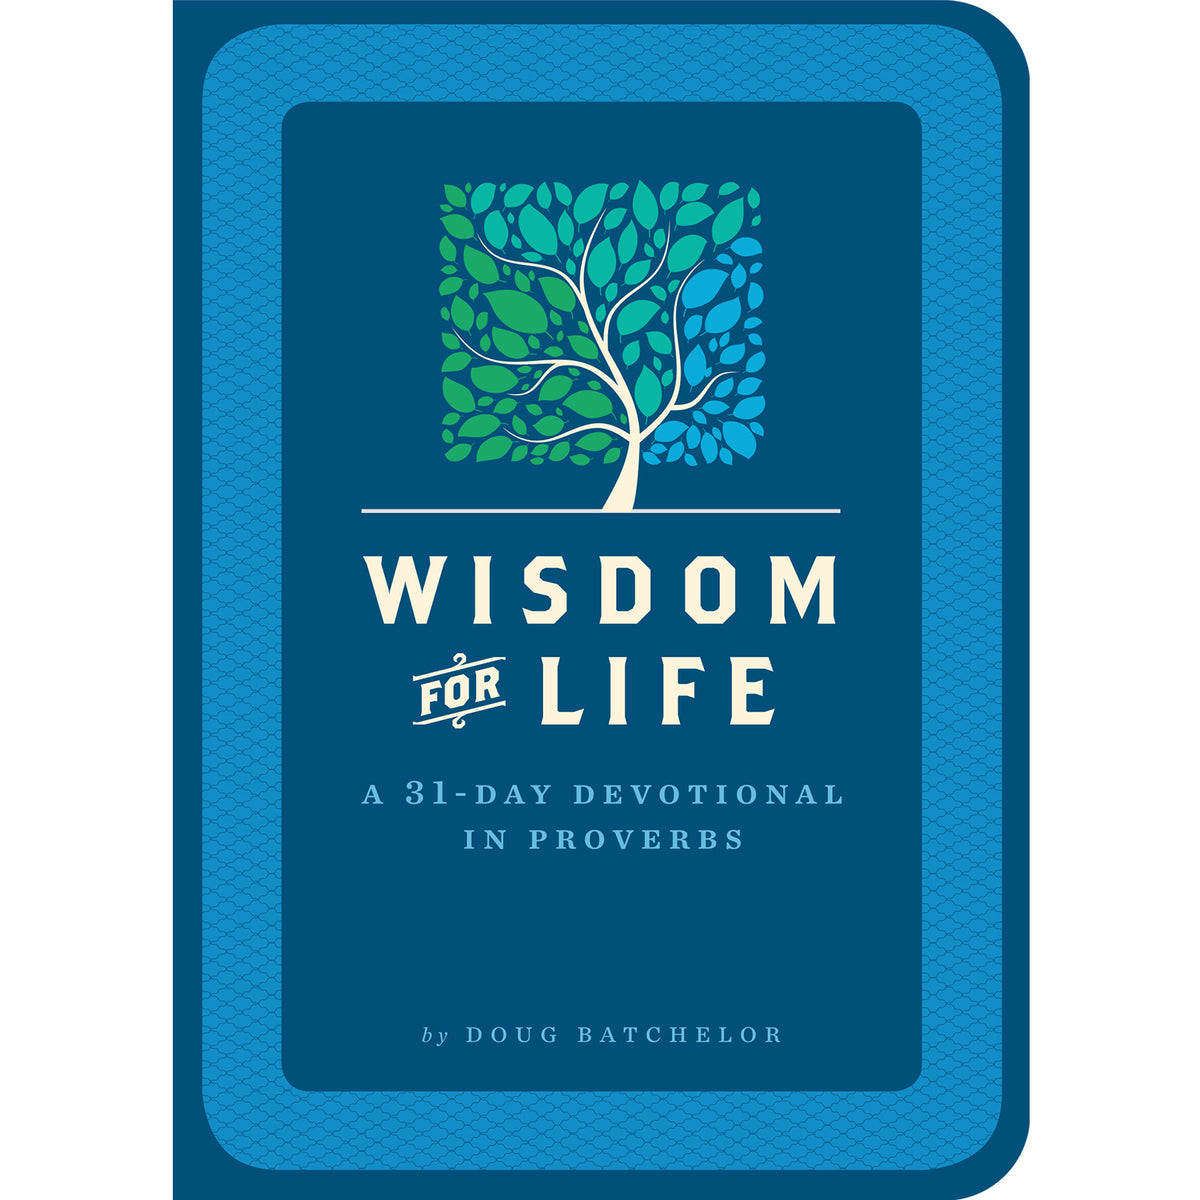 Wisdom for Life: A 31-Day Devotional in Proverbs by Doug Batchelor